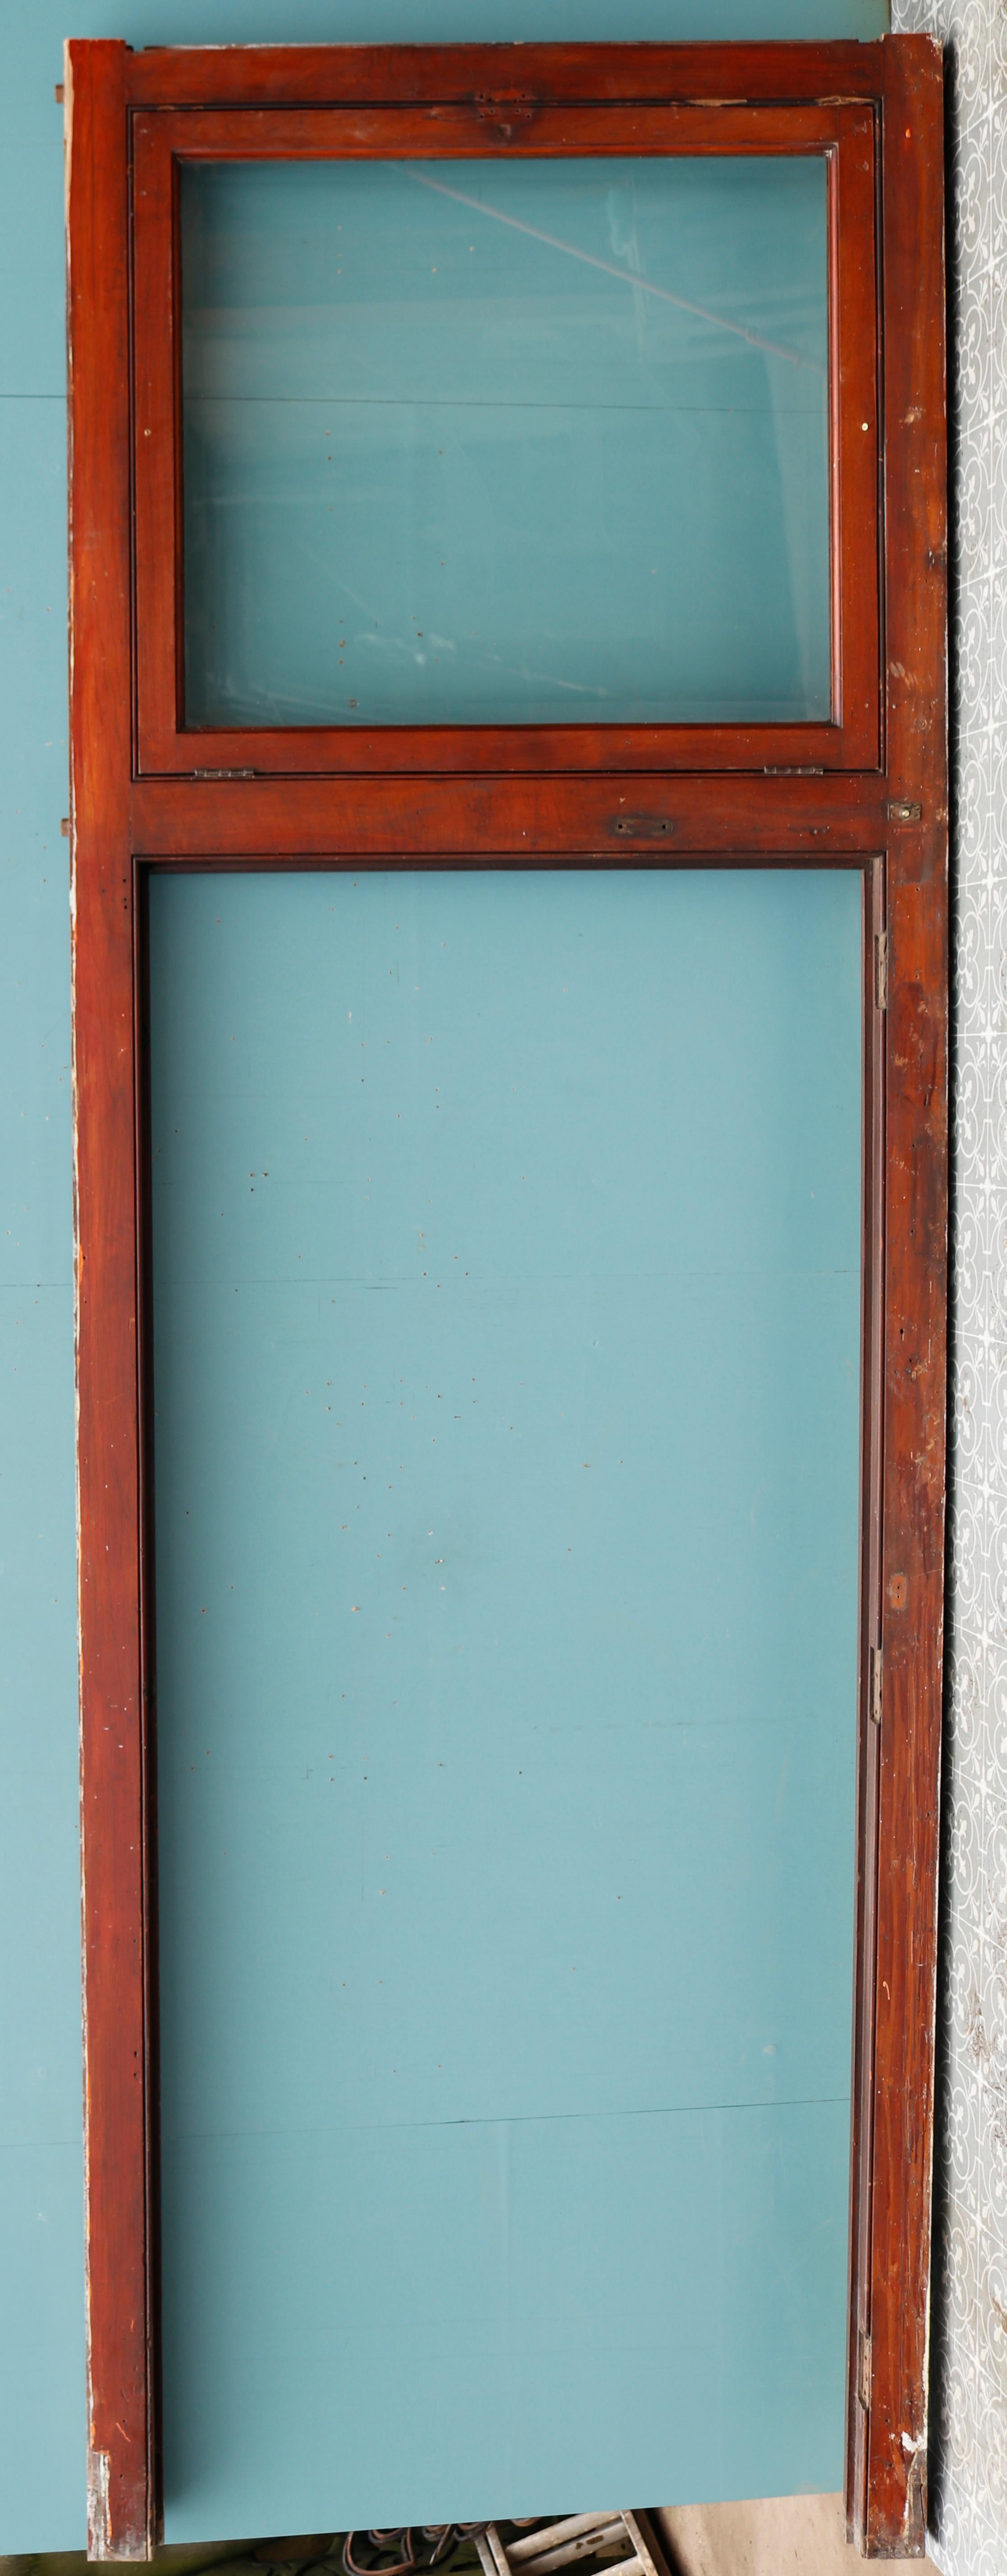 A Reclaimed Hardwood Exterior Door In Fair Condition In Wormelow, Herefordshire